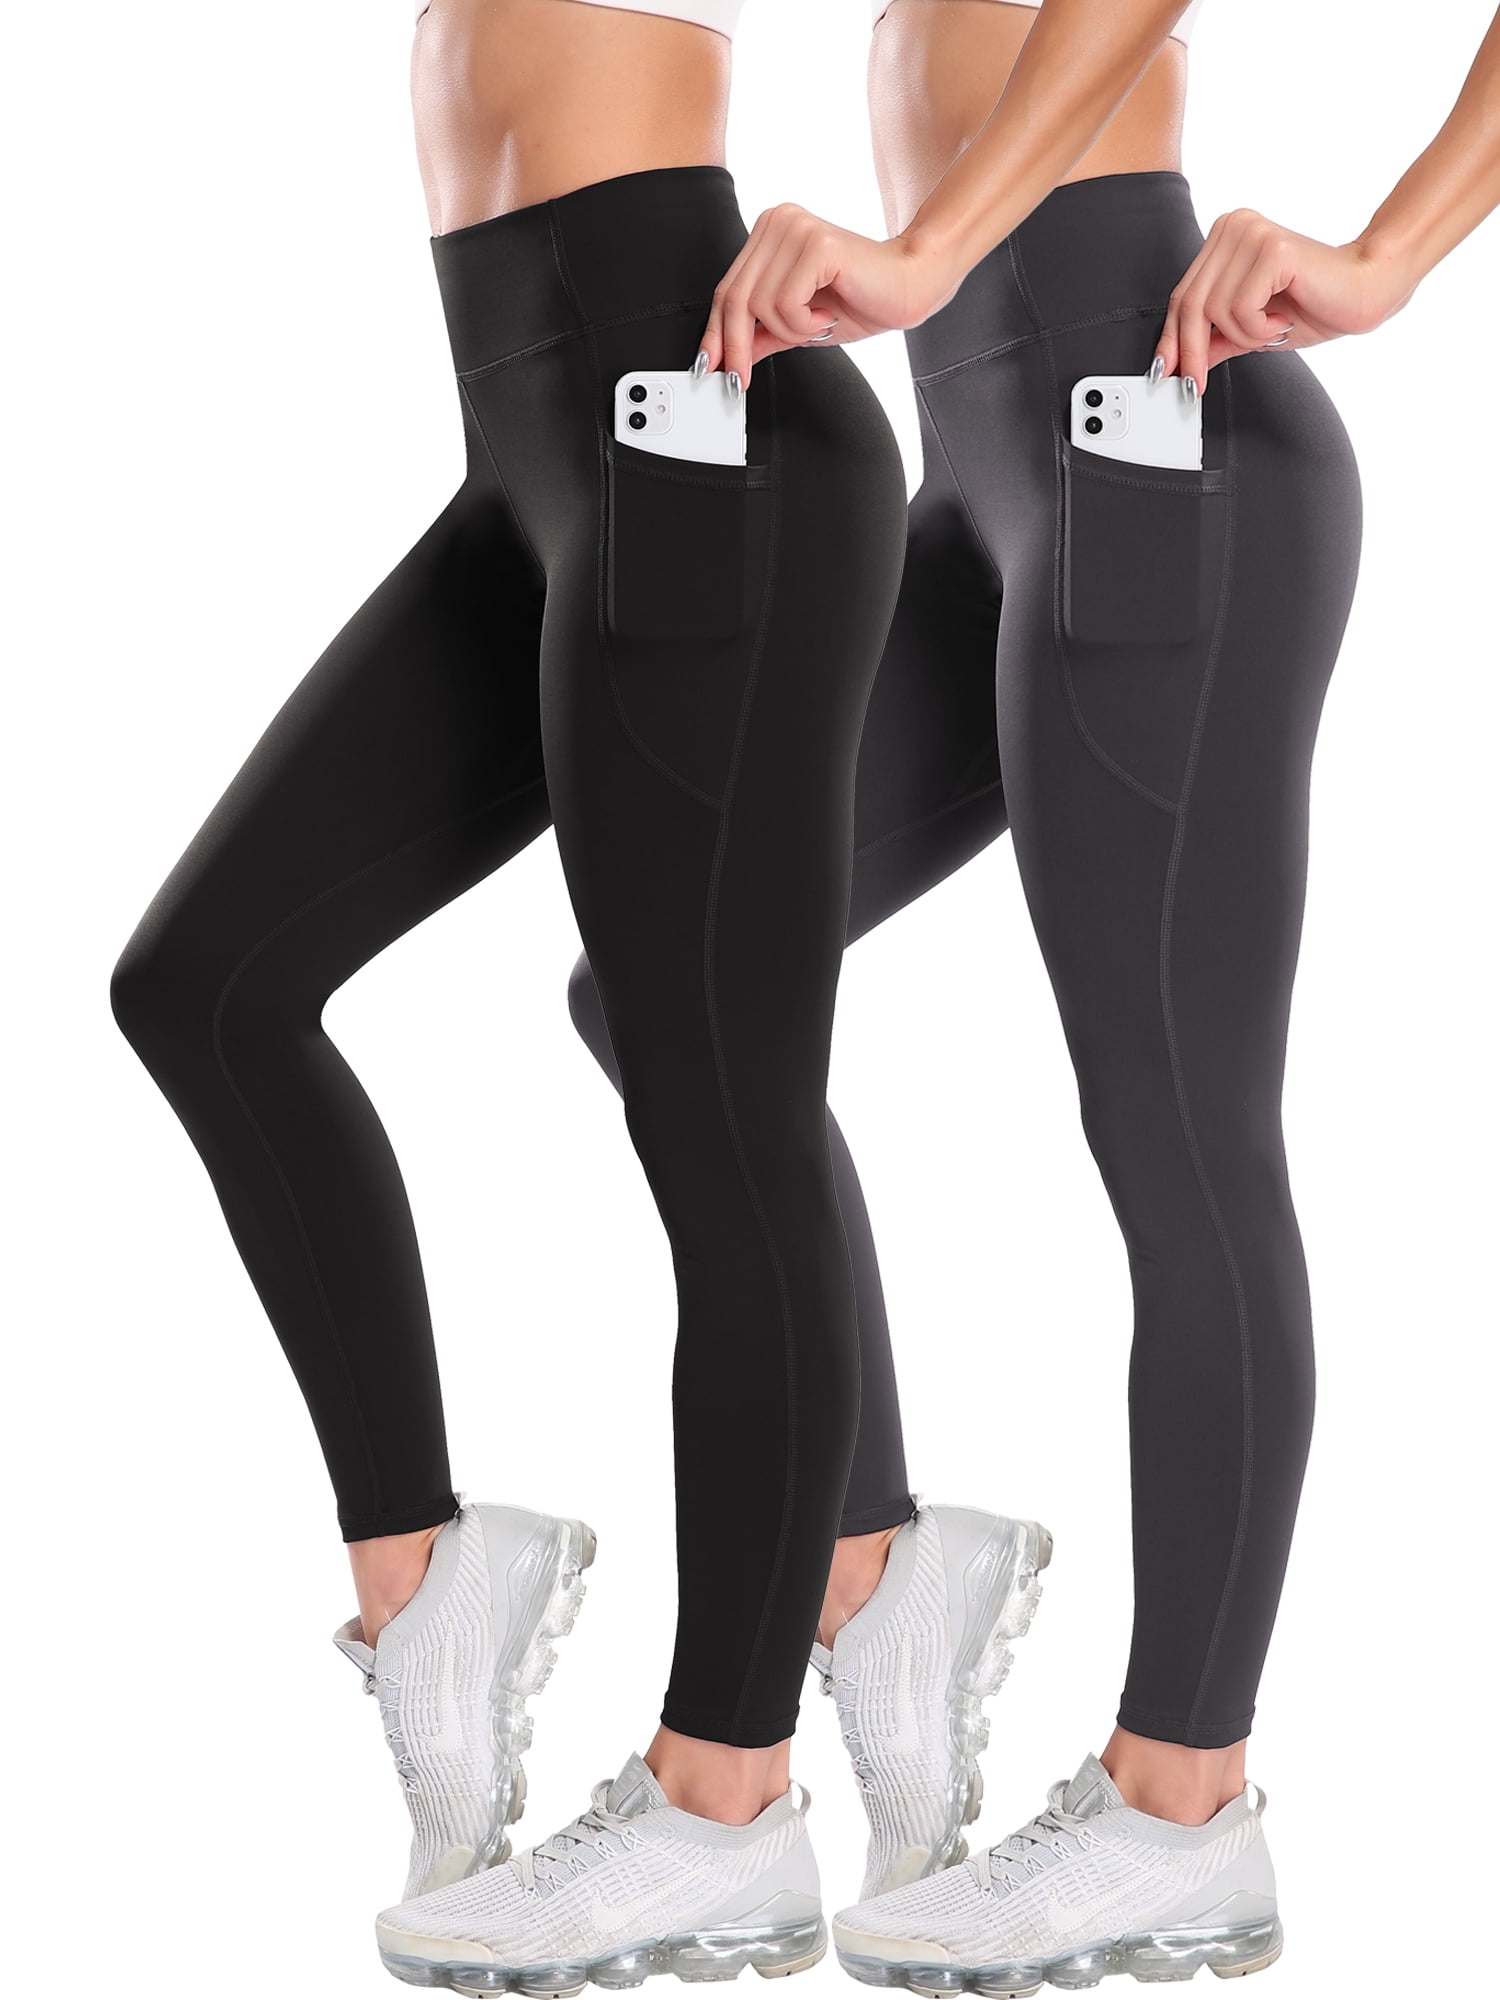 High Waist Yoga Pants with Pockets Tummy Control Workout Legging 4